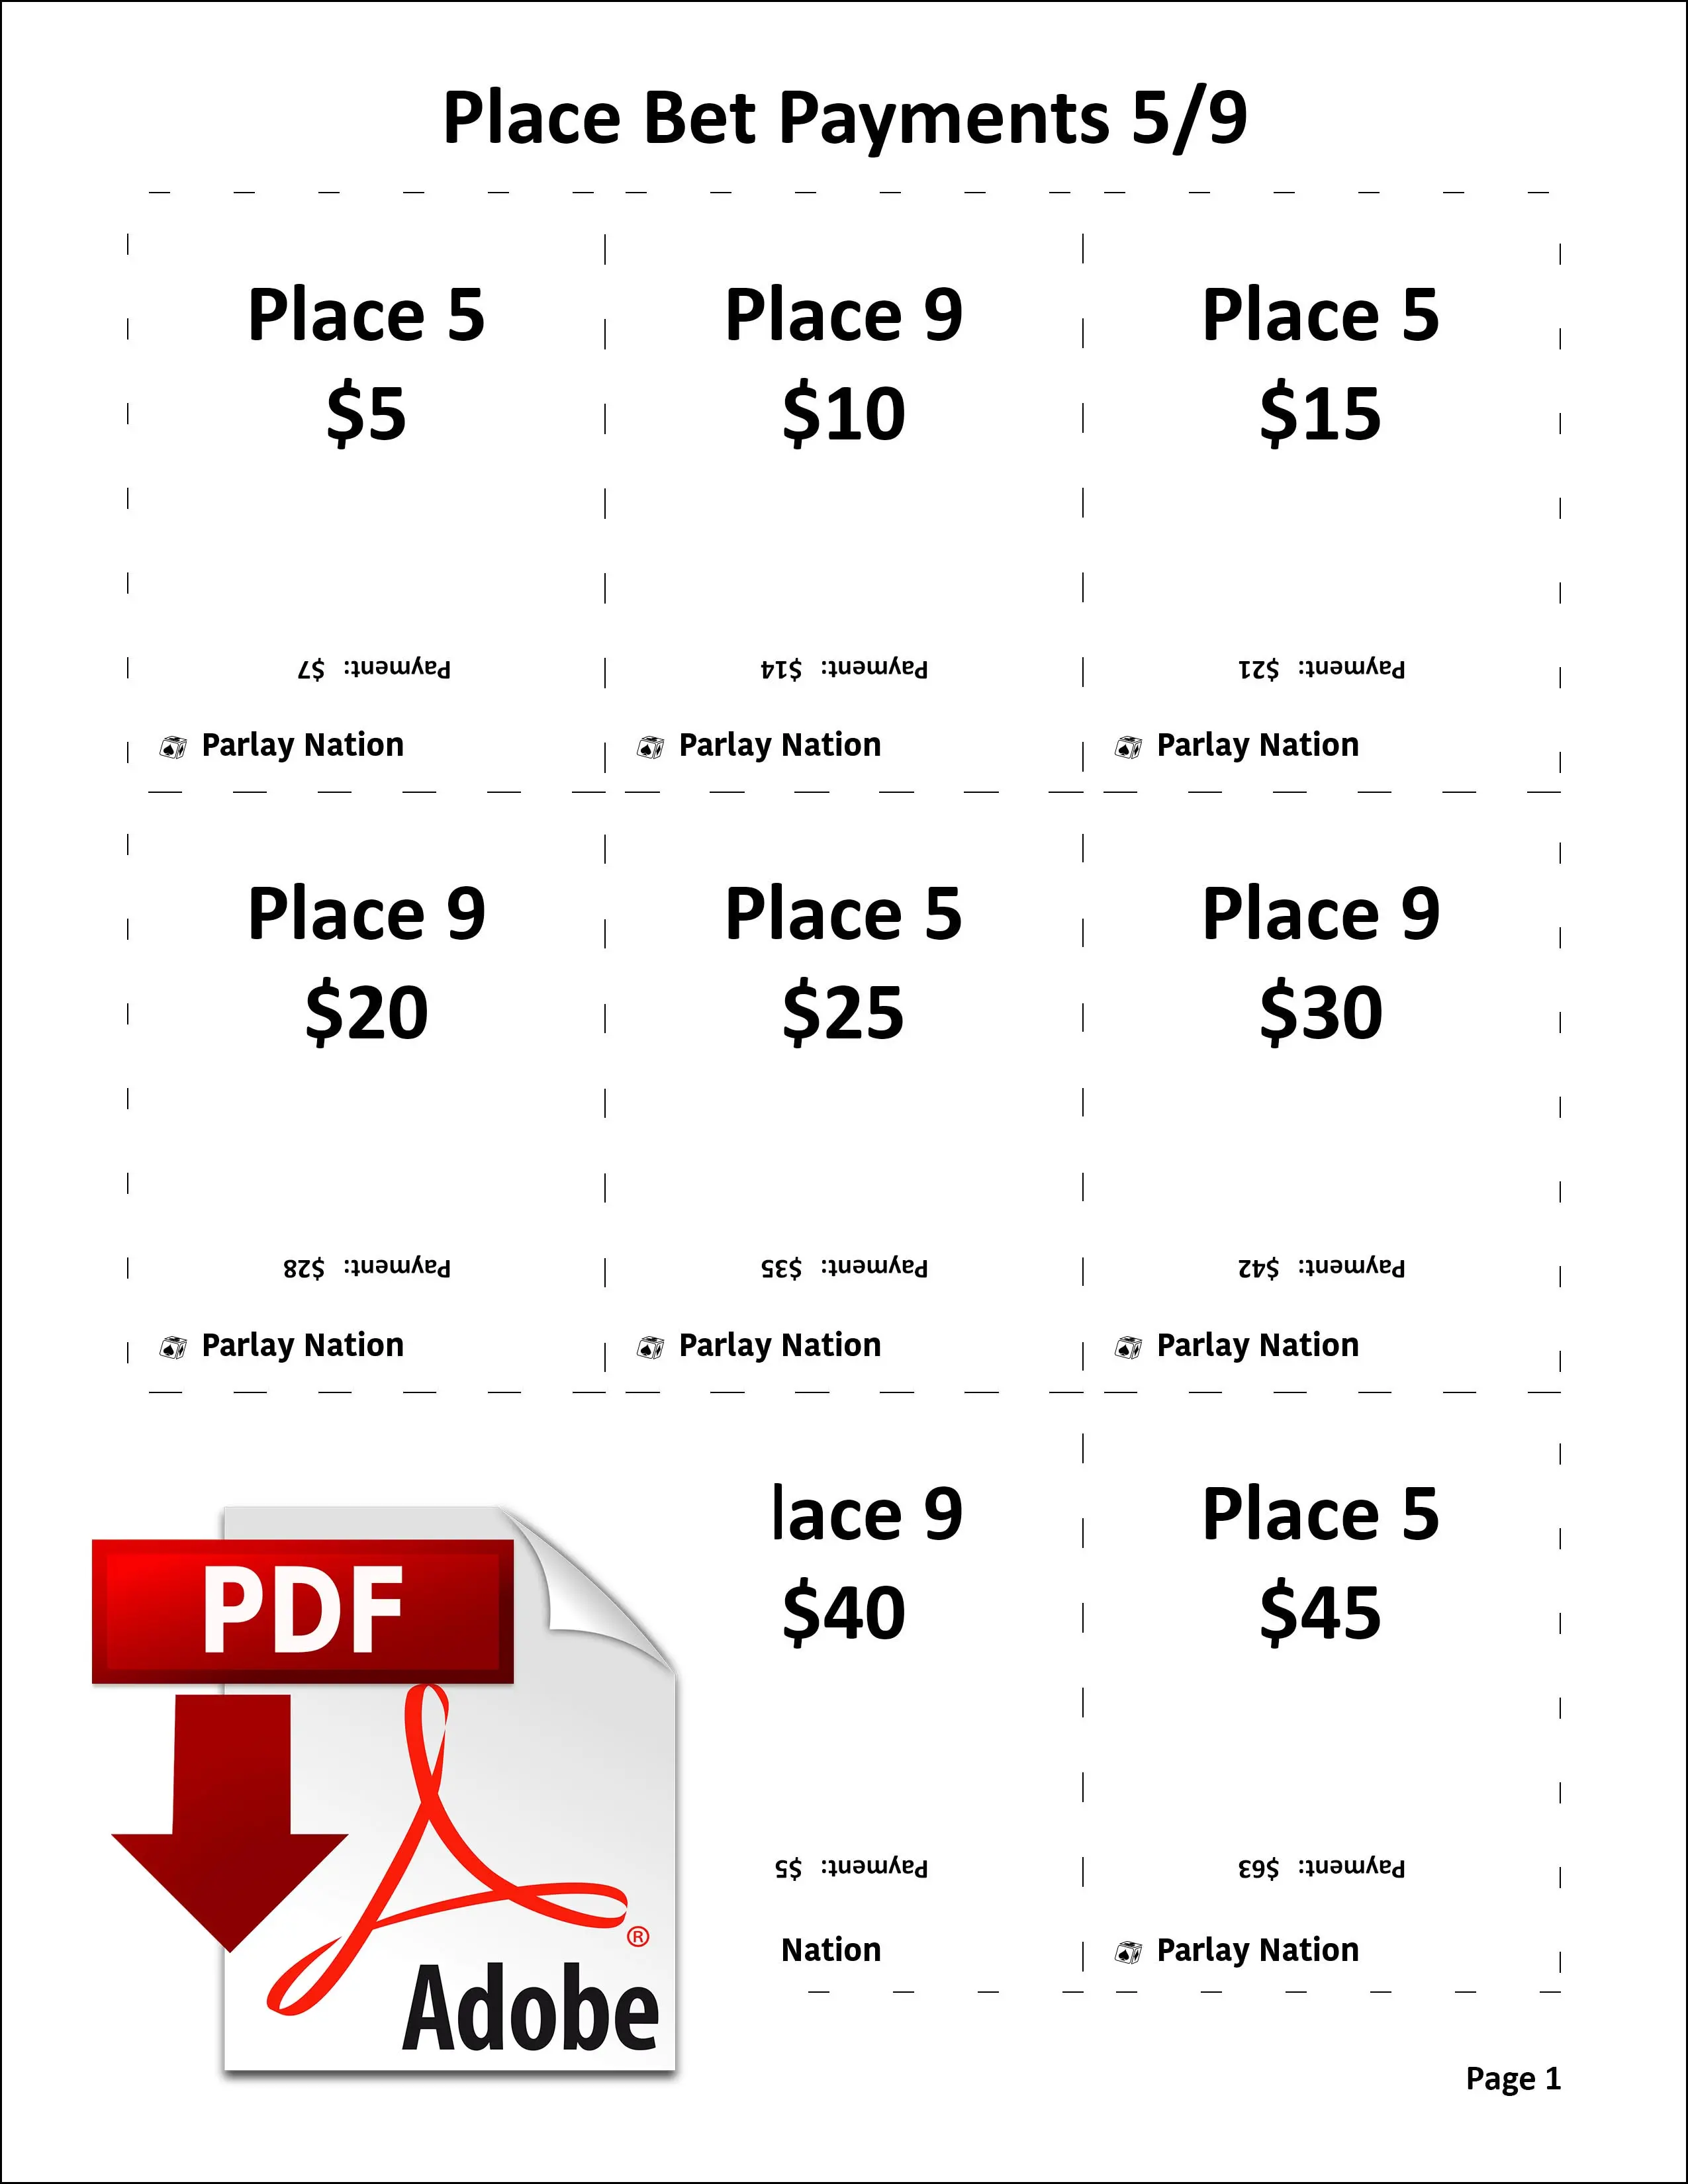 Place Bet Payments 5 & 9 cover sheet.